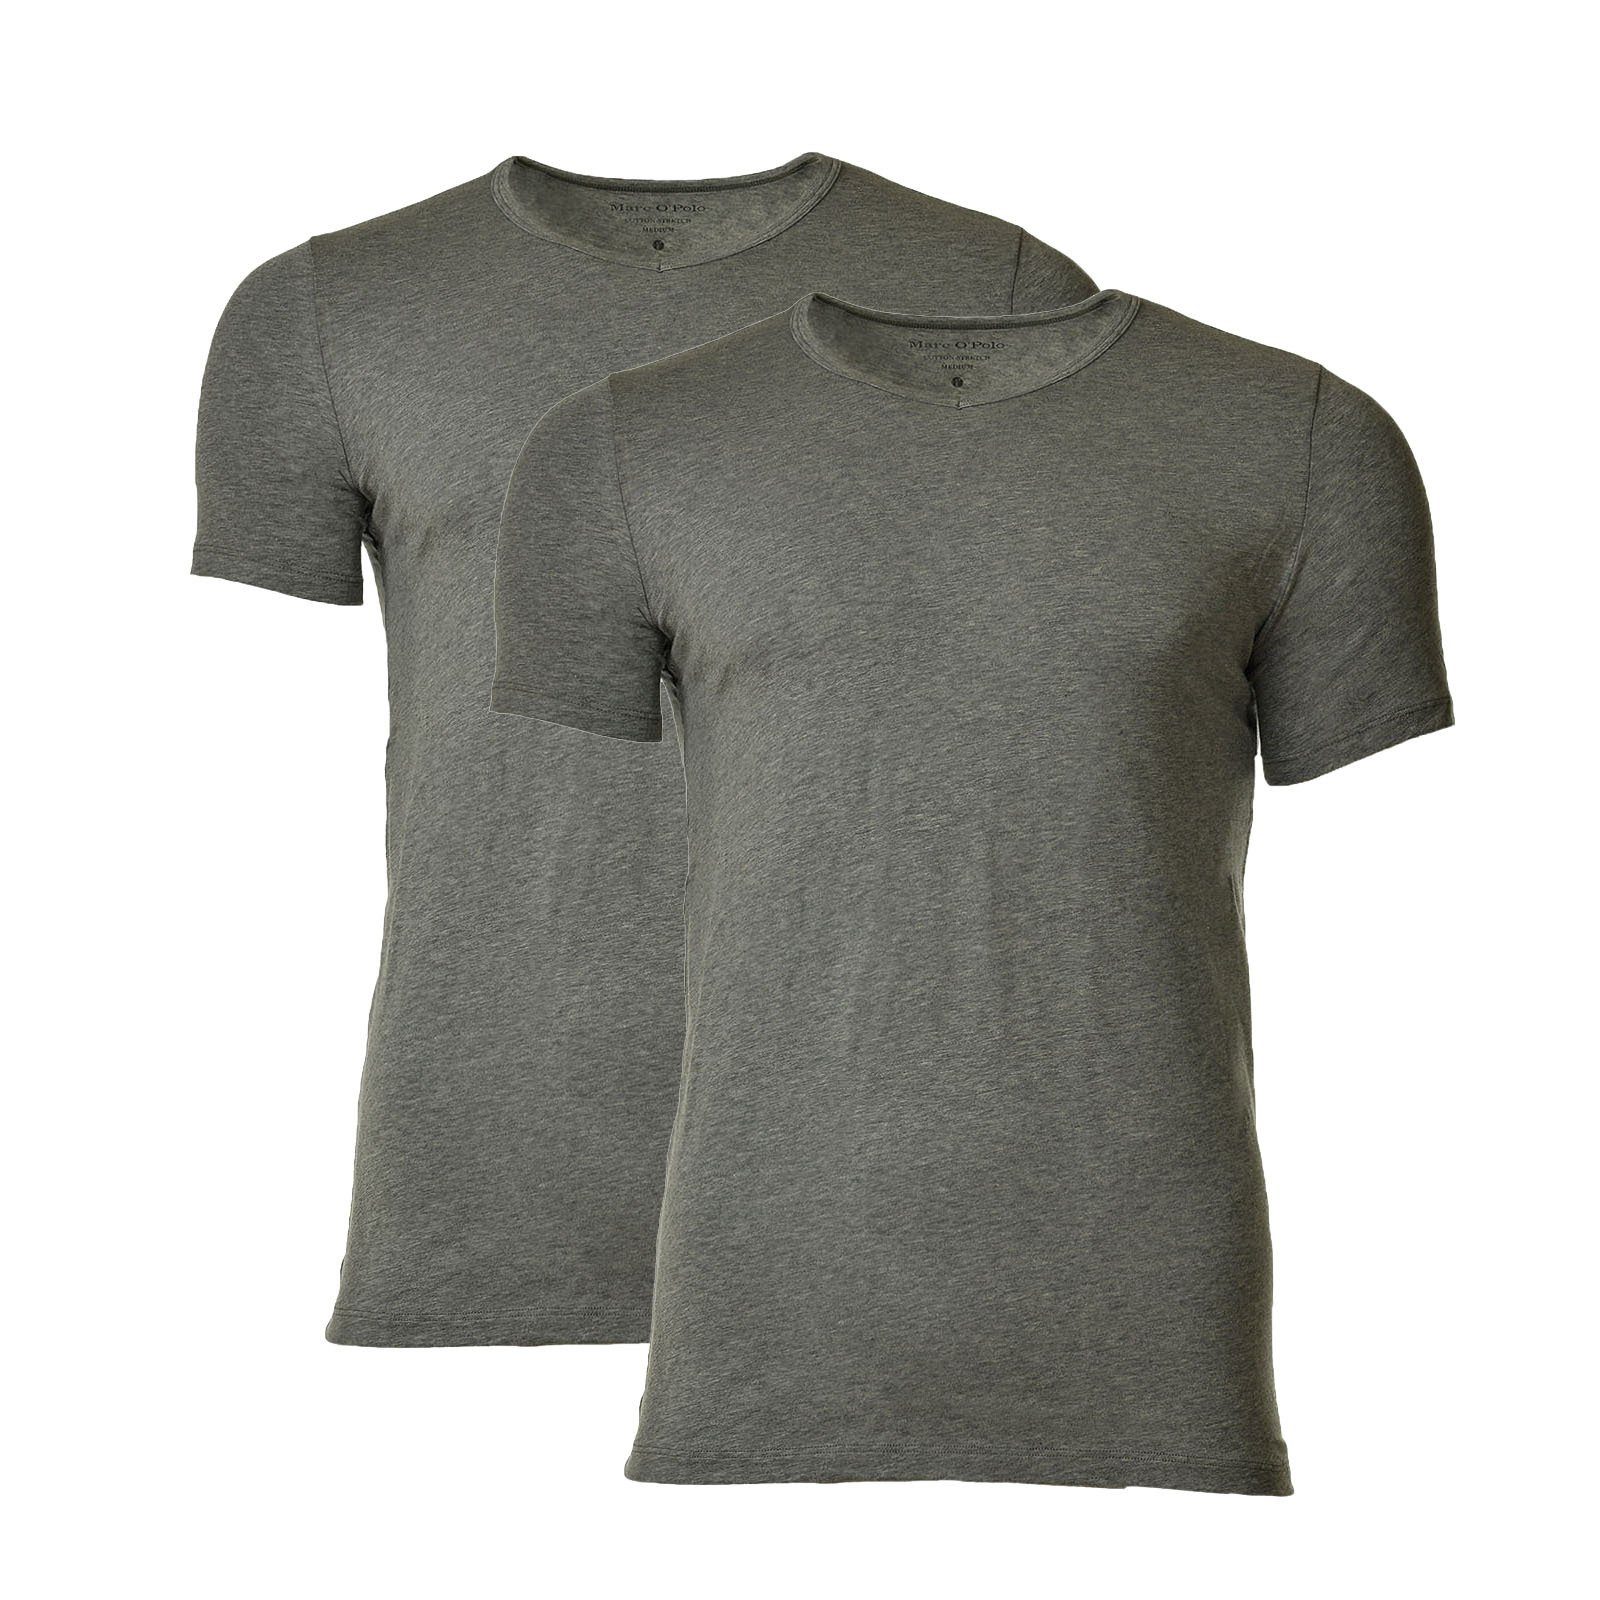 Marc O'Polo T-Shirt »Basic« (Packung, 2-tlg., 2er-Pack) online kaufen | OTTO